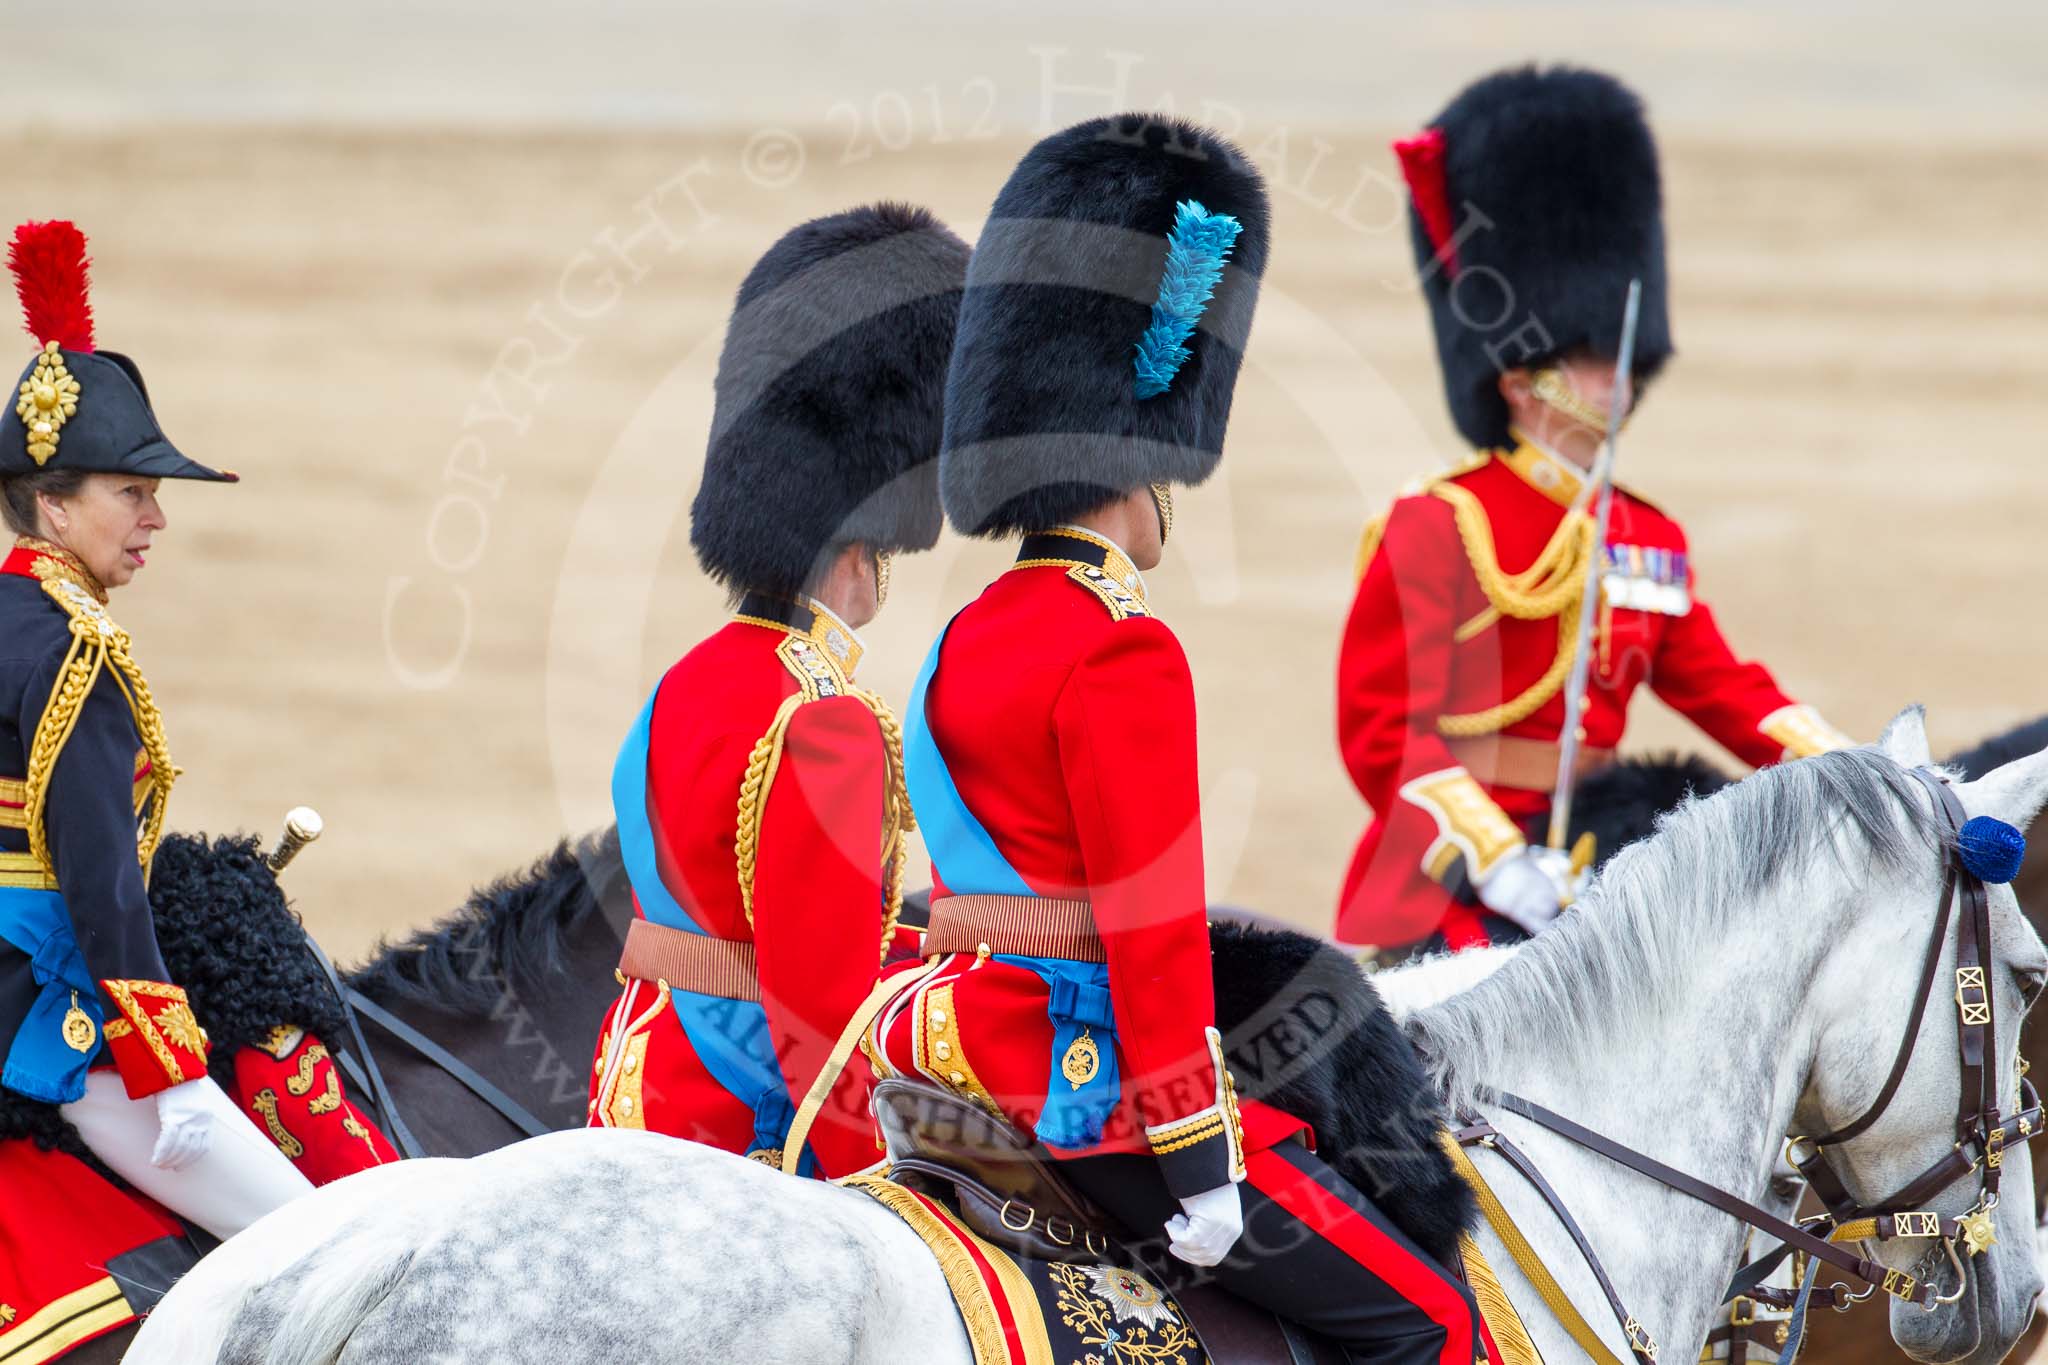 Trooping the Colour 2012: Three Royal Colonels at the end of the parade - HRH The Princess Royal, HRH The Duke of Kent, and HRH The Duke of Cambridge. On the right the Field Officer..
Horse Guards Parade, Westminster,
London SW1,

United Kingdom,
on 16 June 2012 at 12:11, image #672